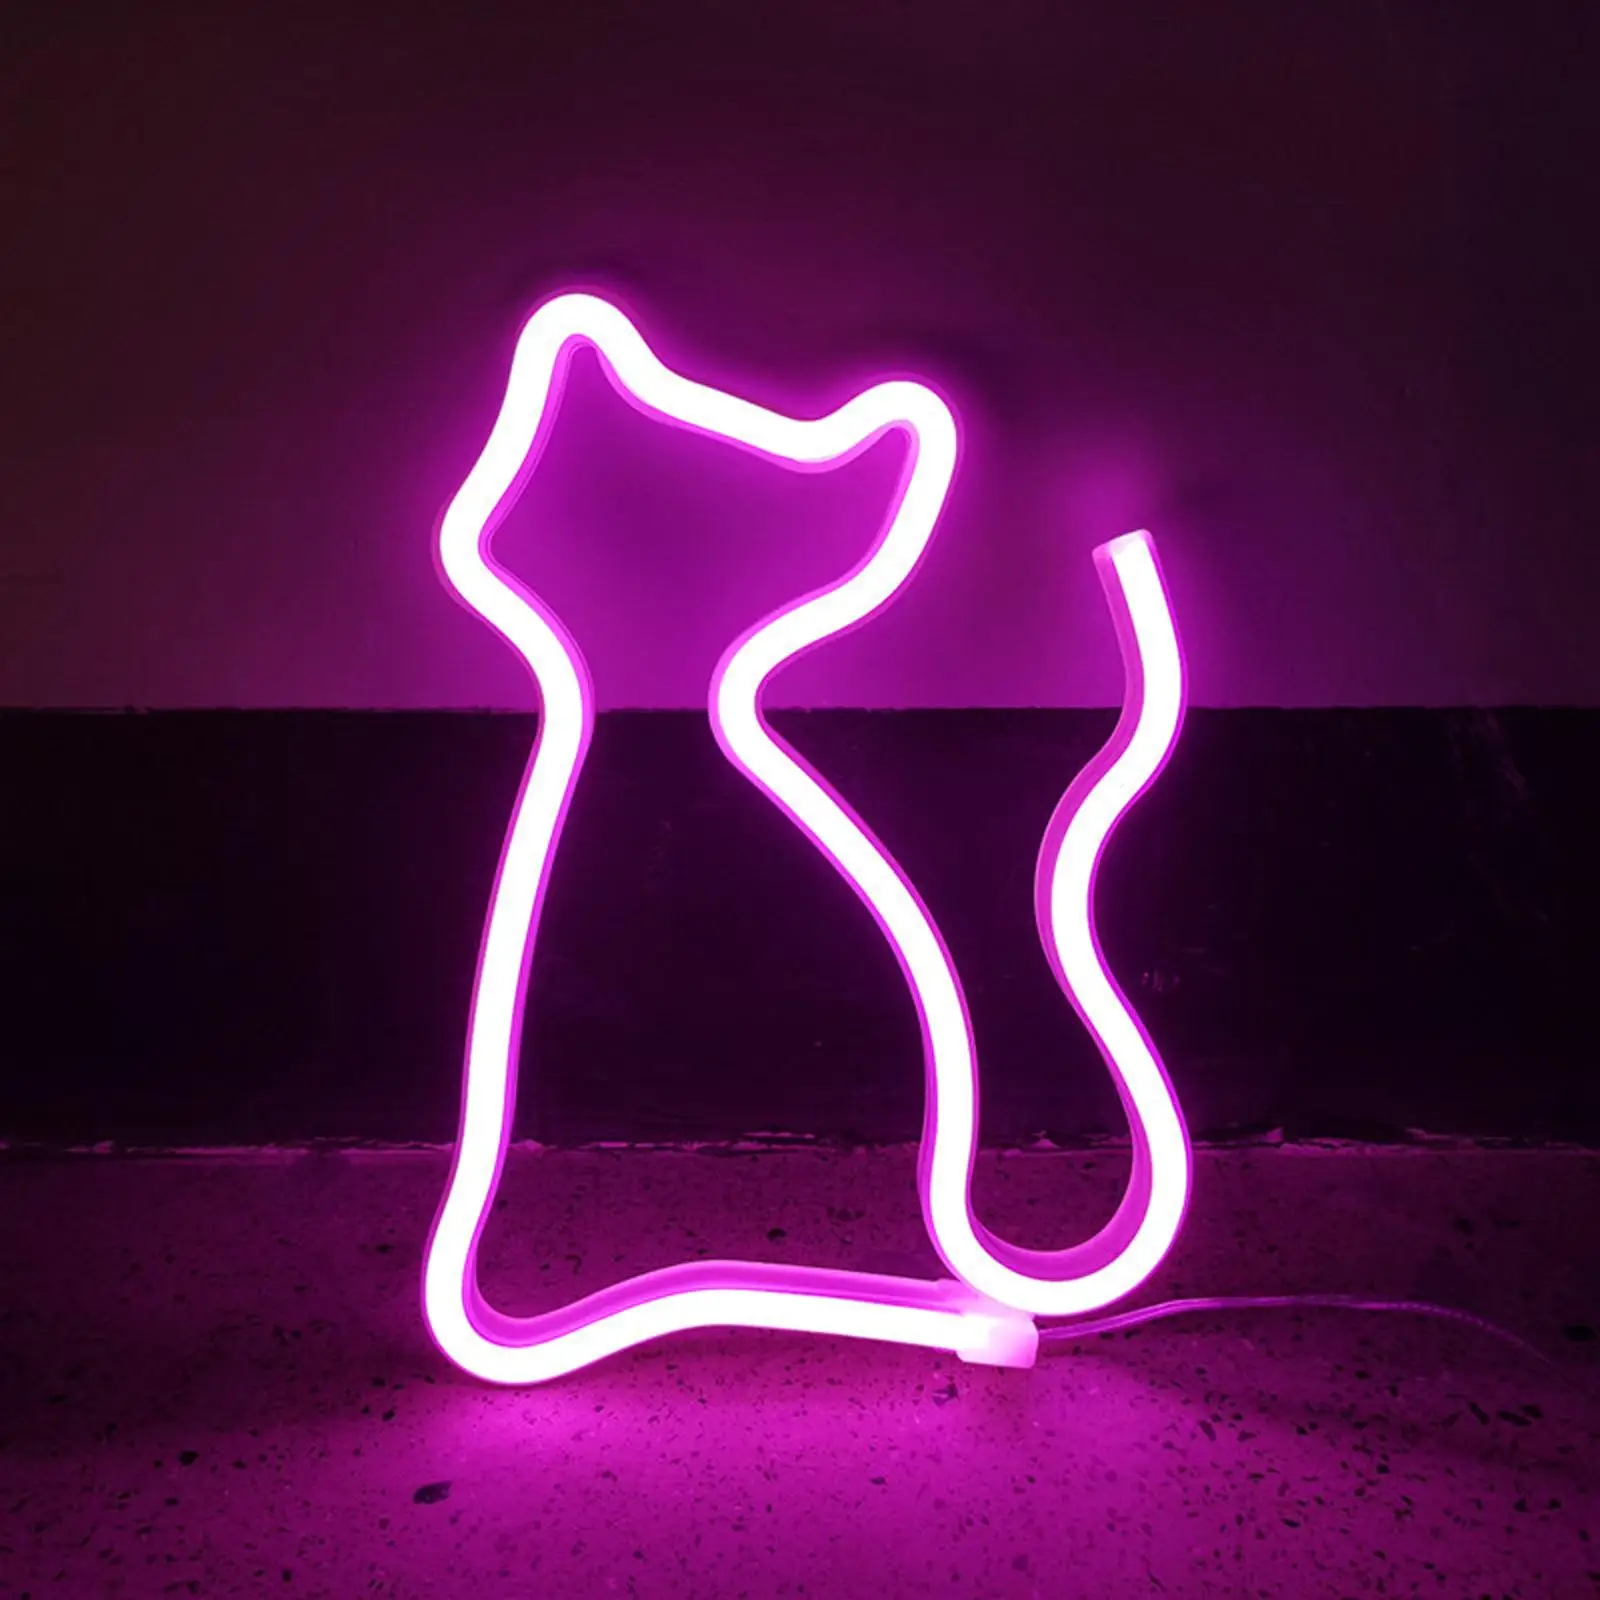 Cat Neon Lamp Sign Night Light USB Battery Powered Wall Lamp Wall Hanging Neon Lamp for Party Bar Pub Kids Room Table Decor